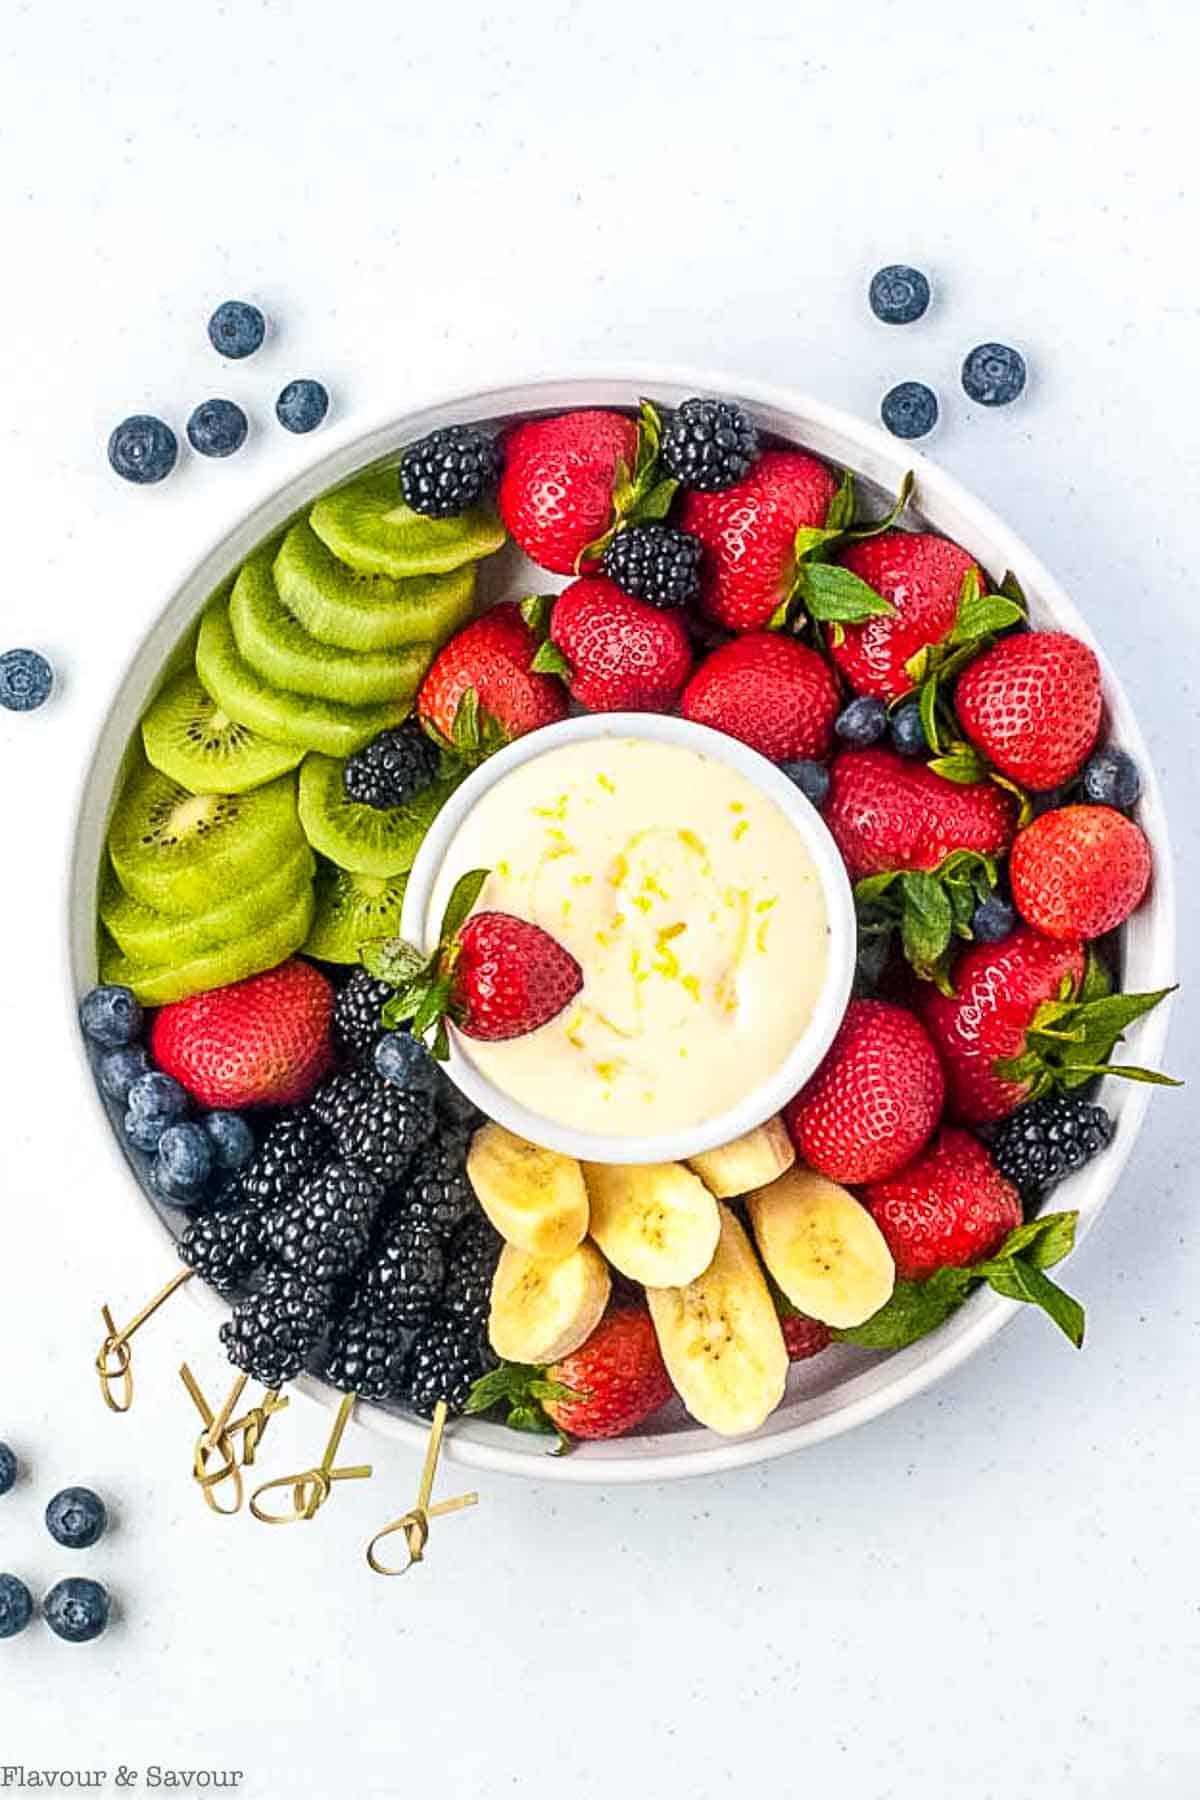 Overhead view of a round dish filled with fruit with a bowl of lemon dip in the center.